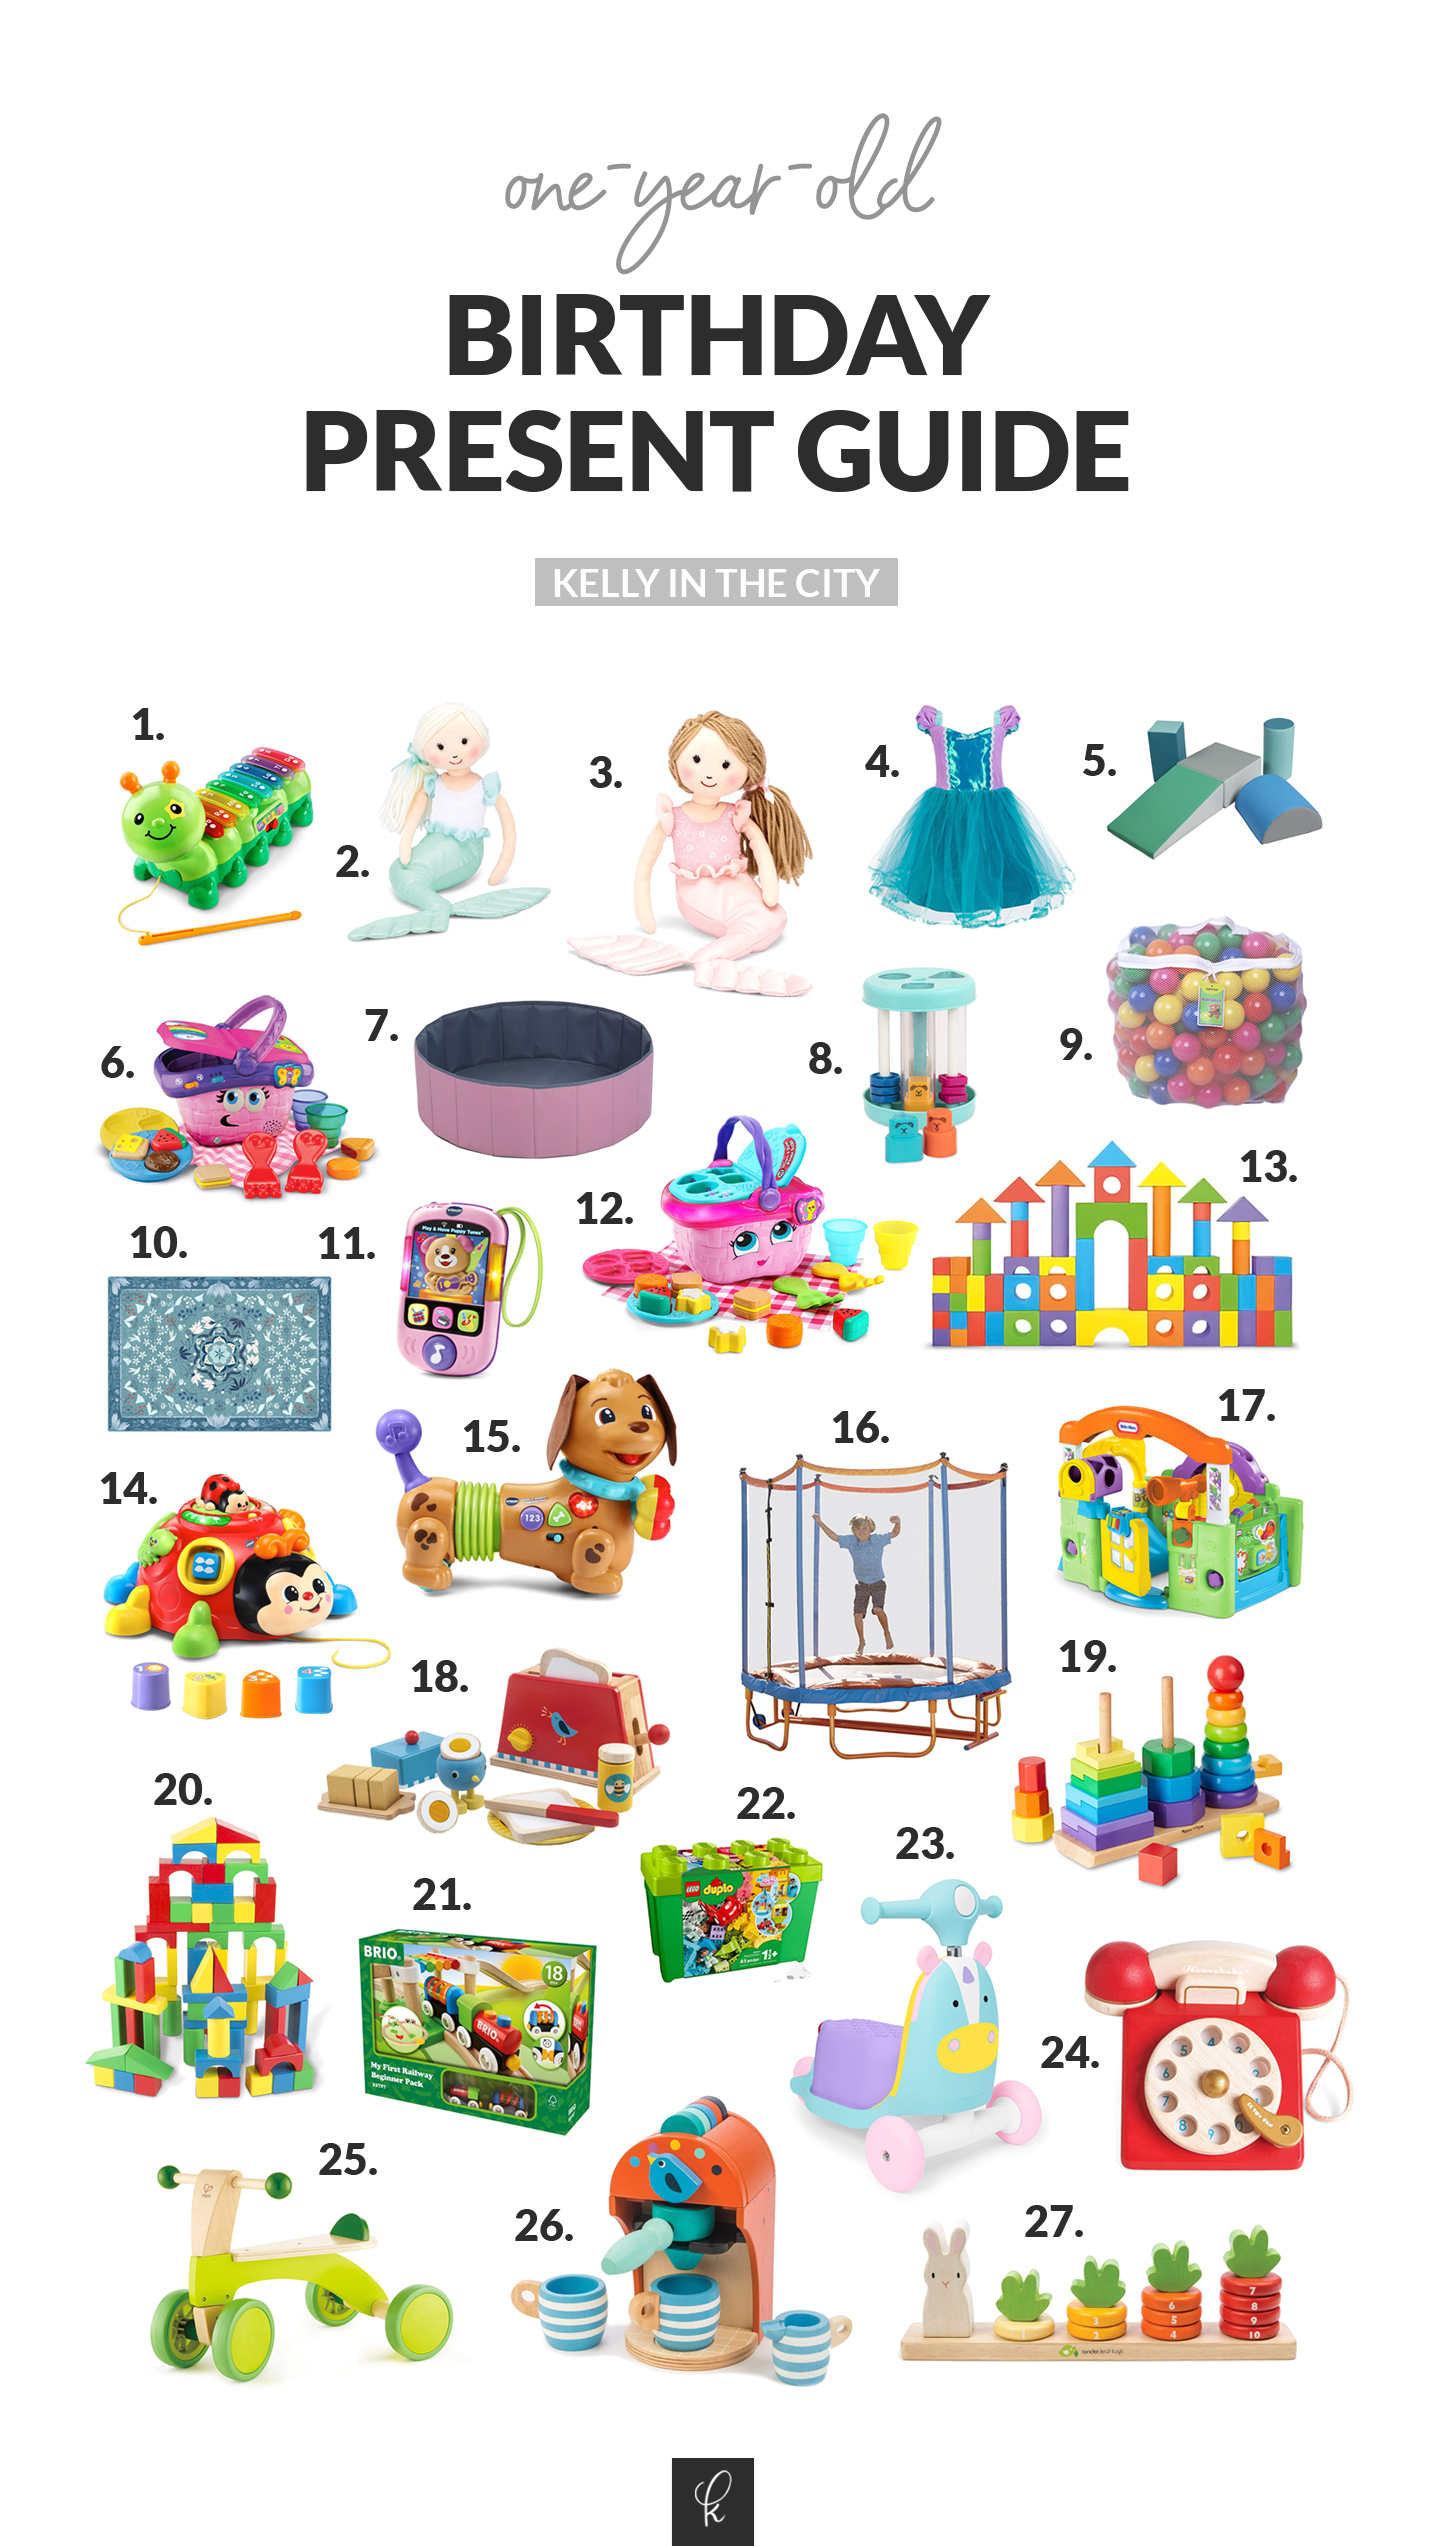 Gifts for One-Year-Olds